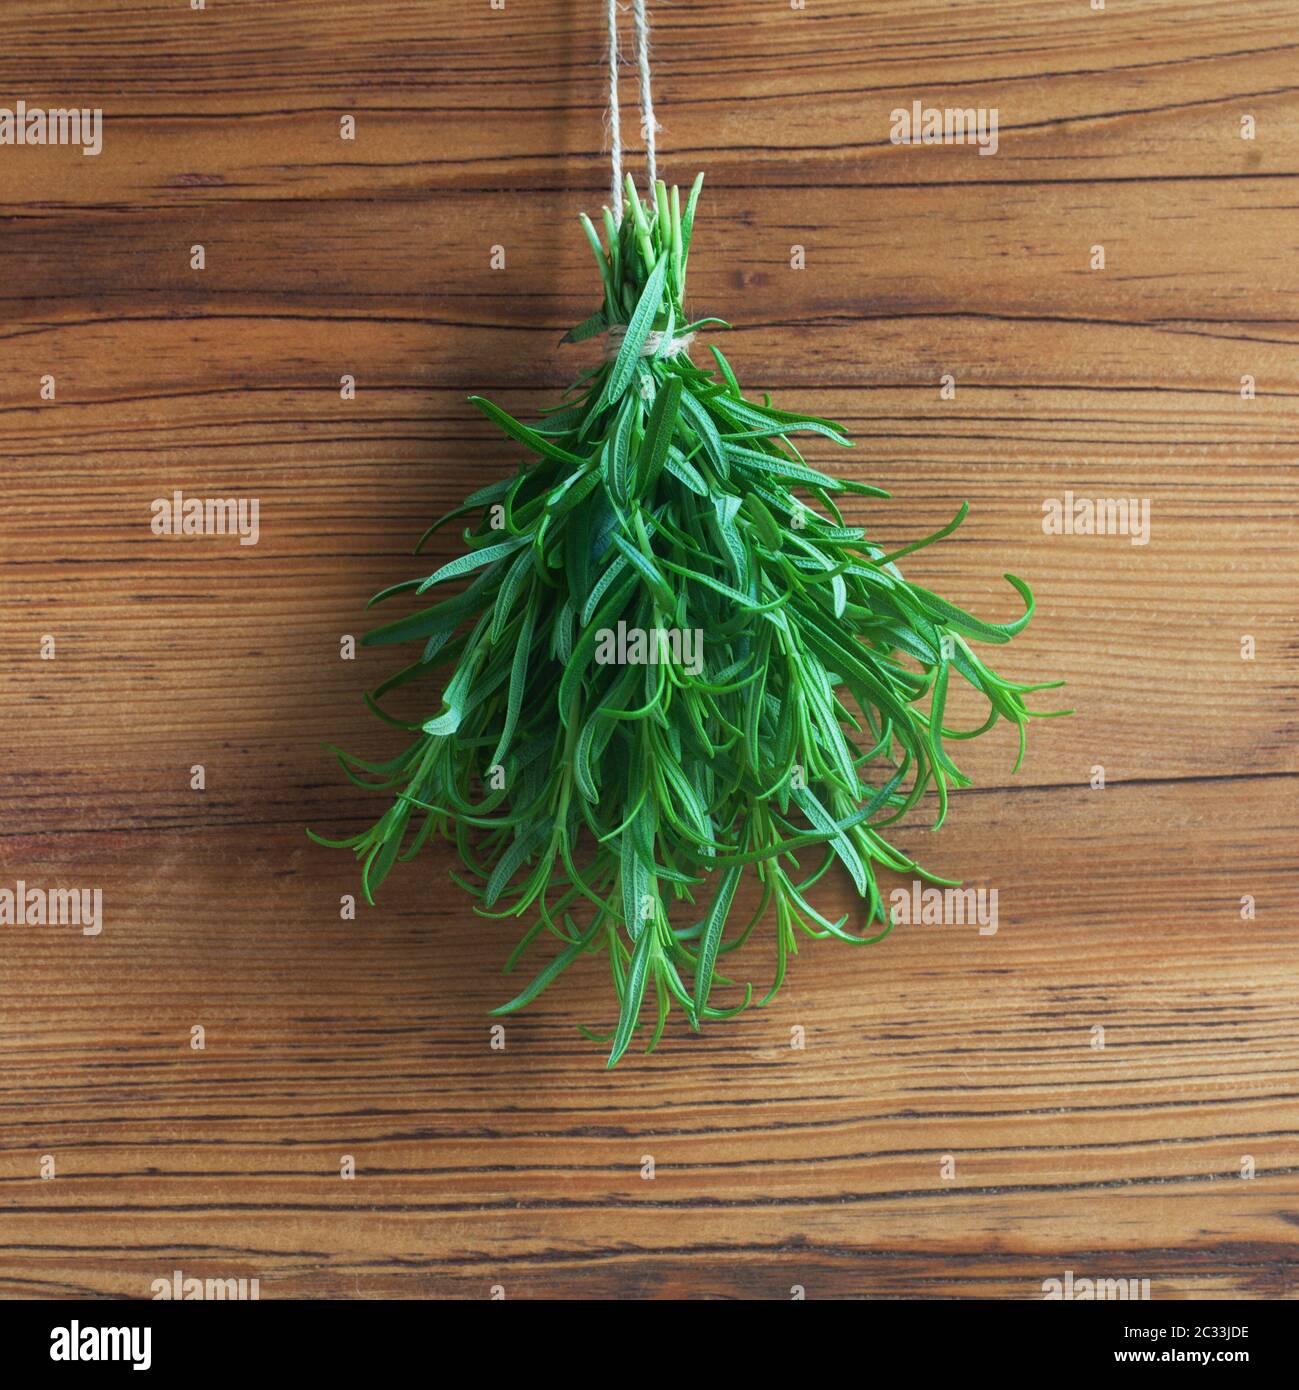 A Bunch Of Rosemary In Front Of A Wooden Background Stock Photo